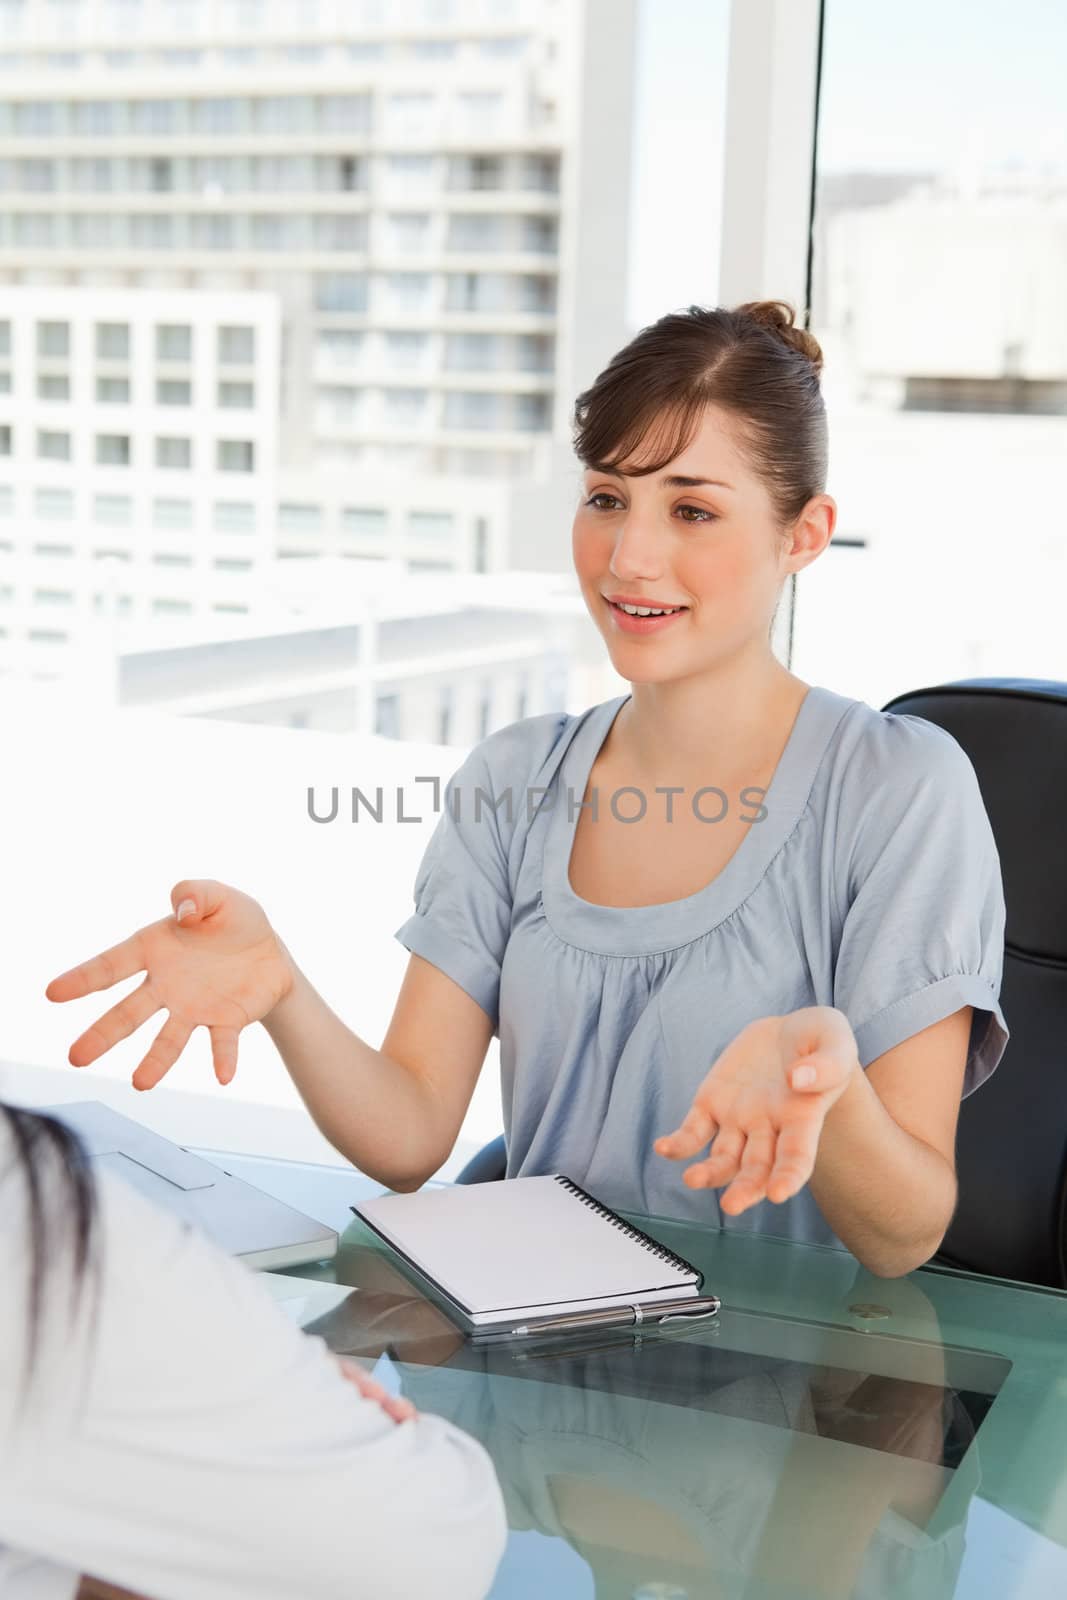 A smiling business woman in her office chats to her co-worker